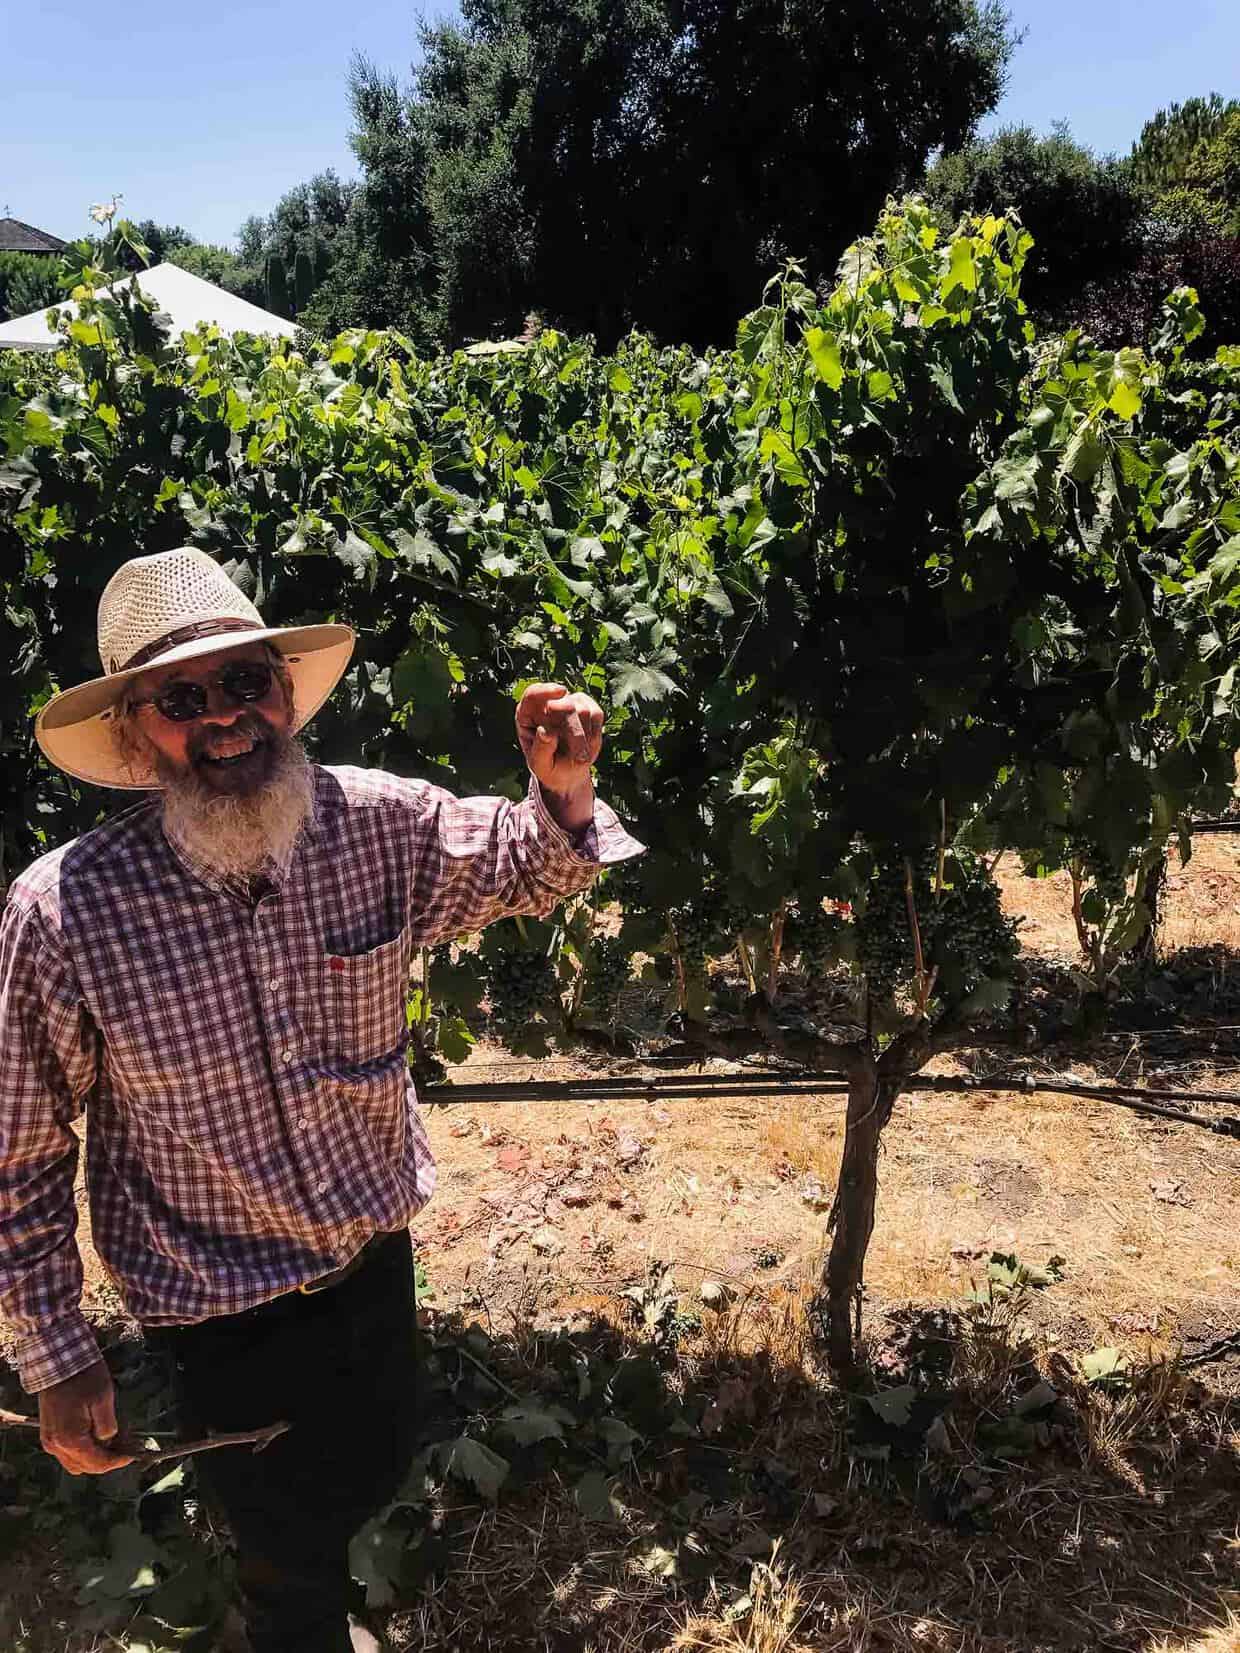 An older man in a plaid shirt and sun hat showing off grapes growing at a vineyard.